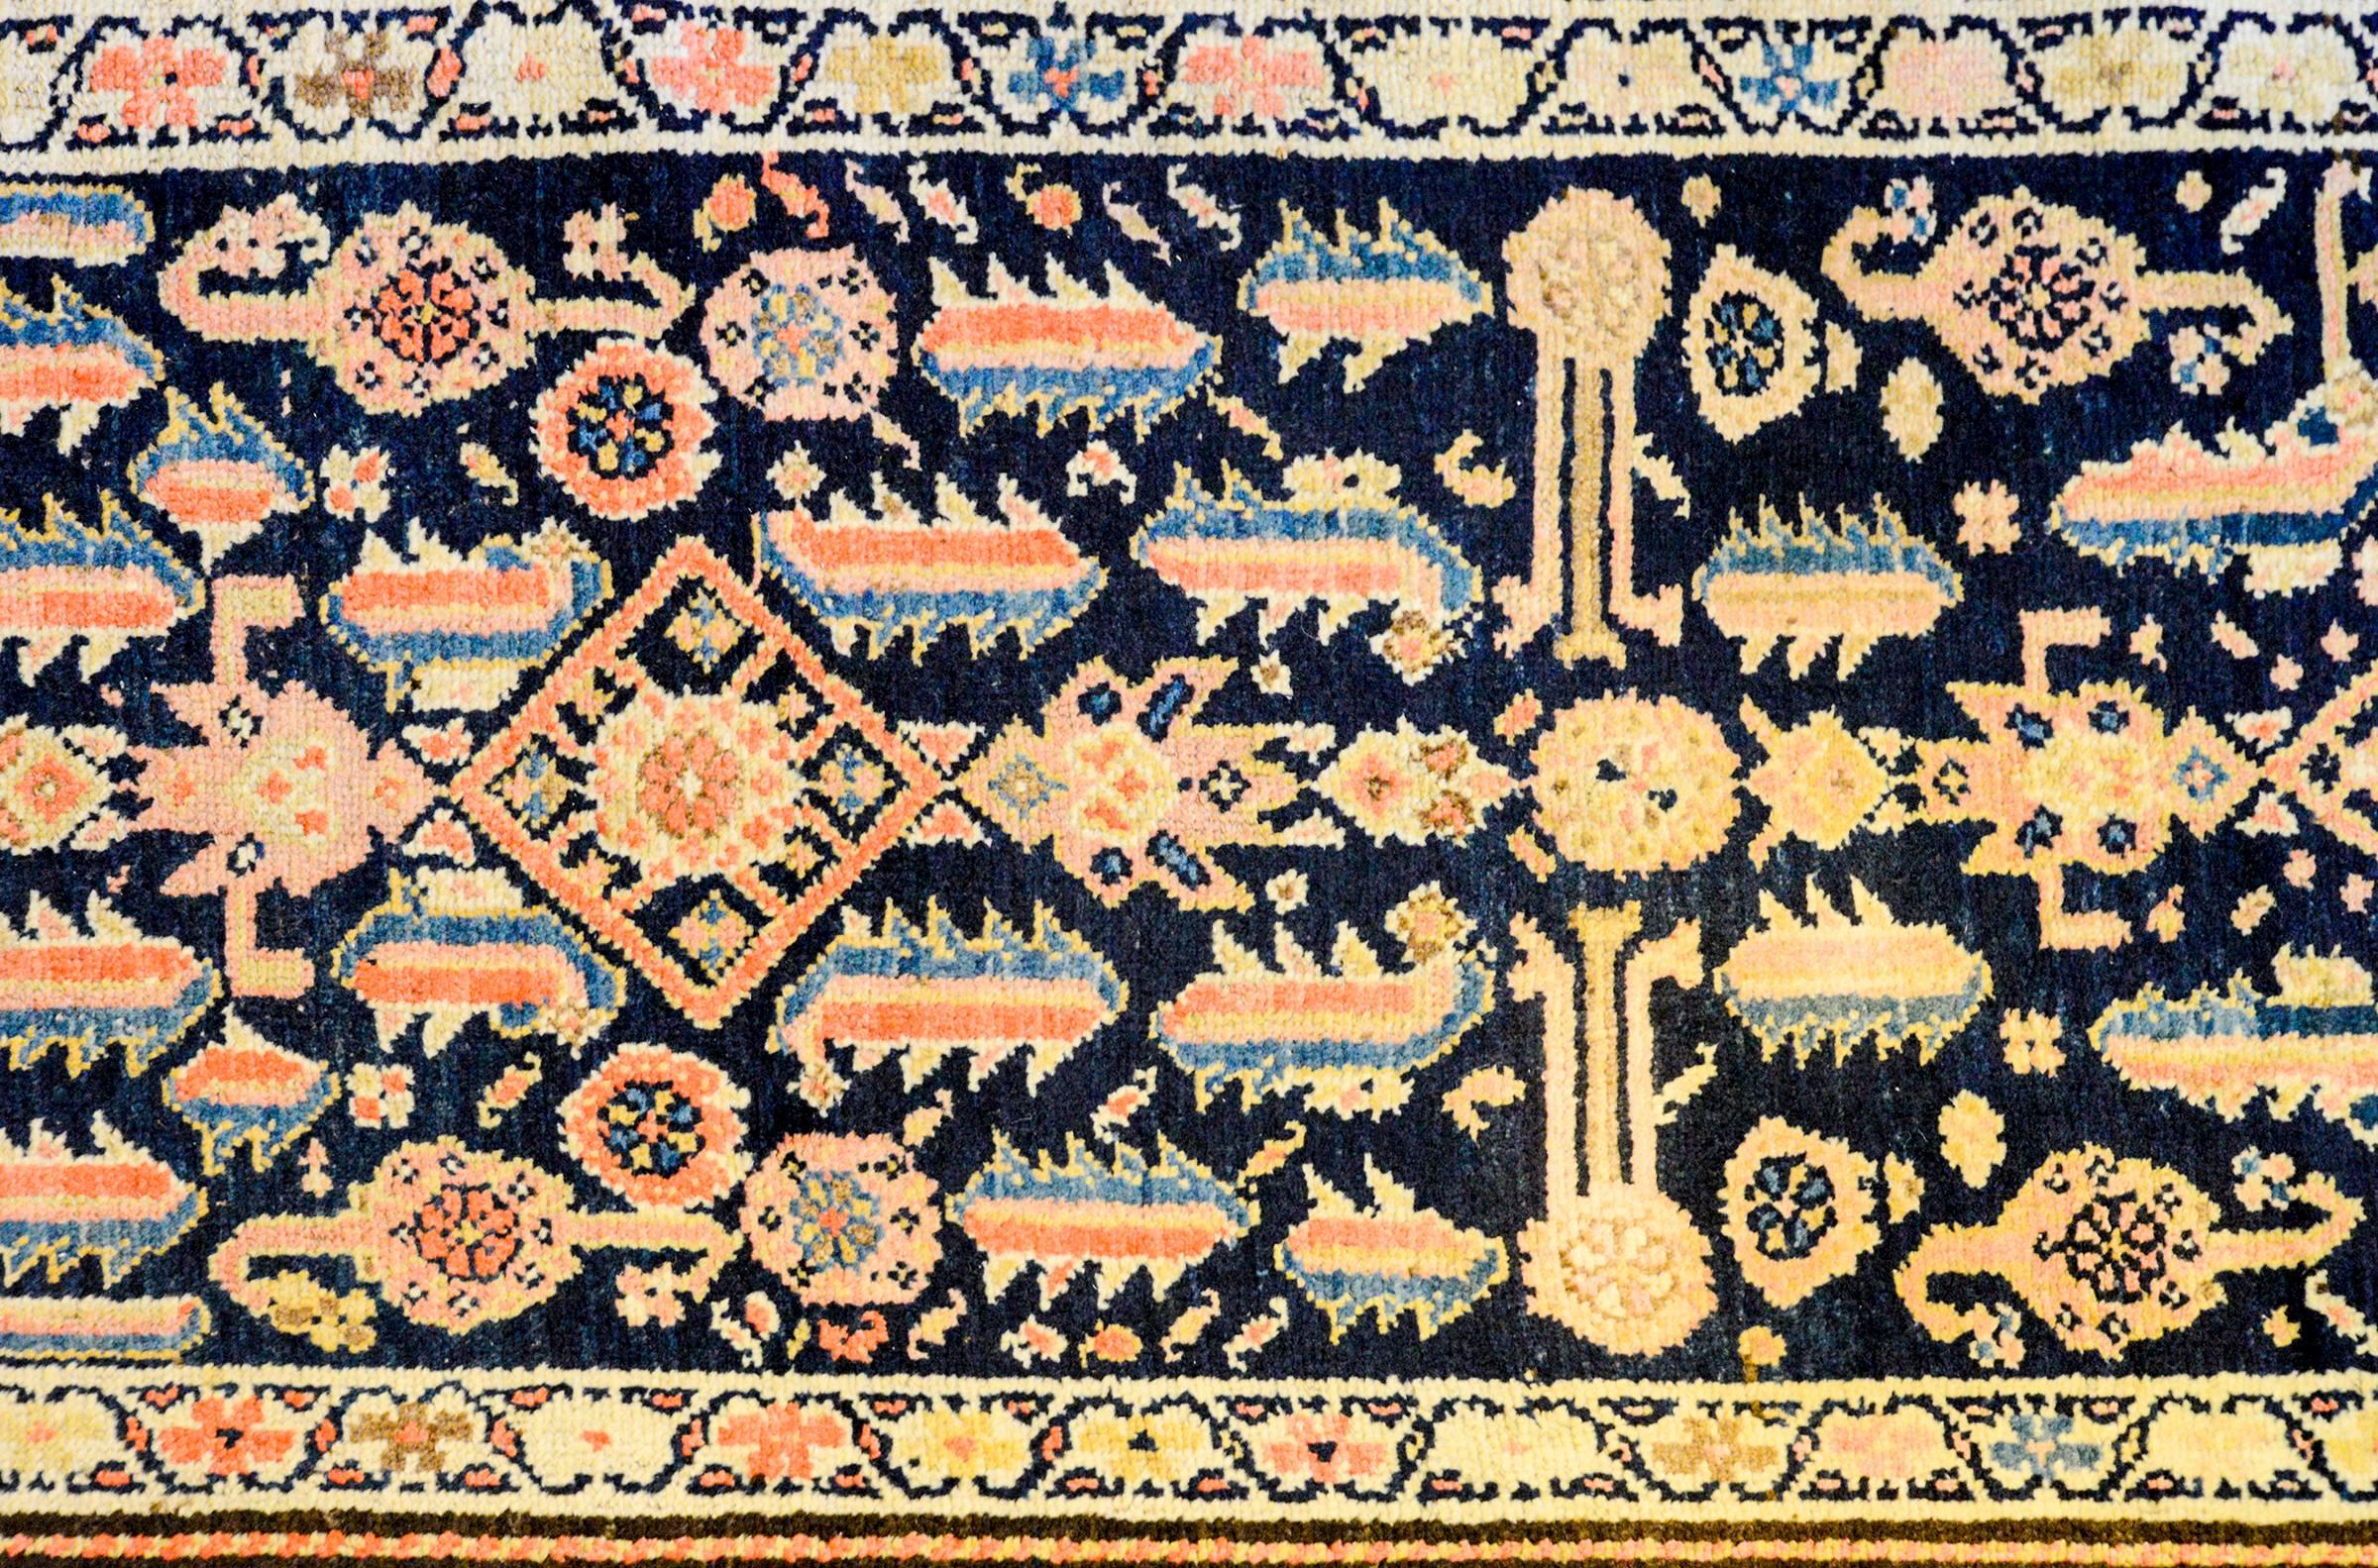 An early 20th century Kurdish runner with a beautiful all-over pattern of multicolored shrimp and flowers on a dark indigo background. The border is wide, with a large-scale paisley pattern on a yellow background, flanked by two contrasting petite